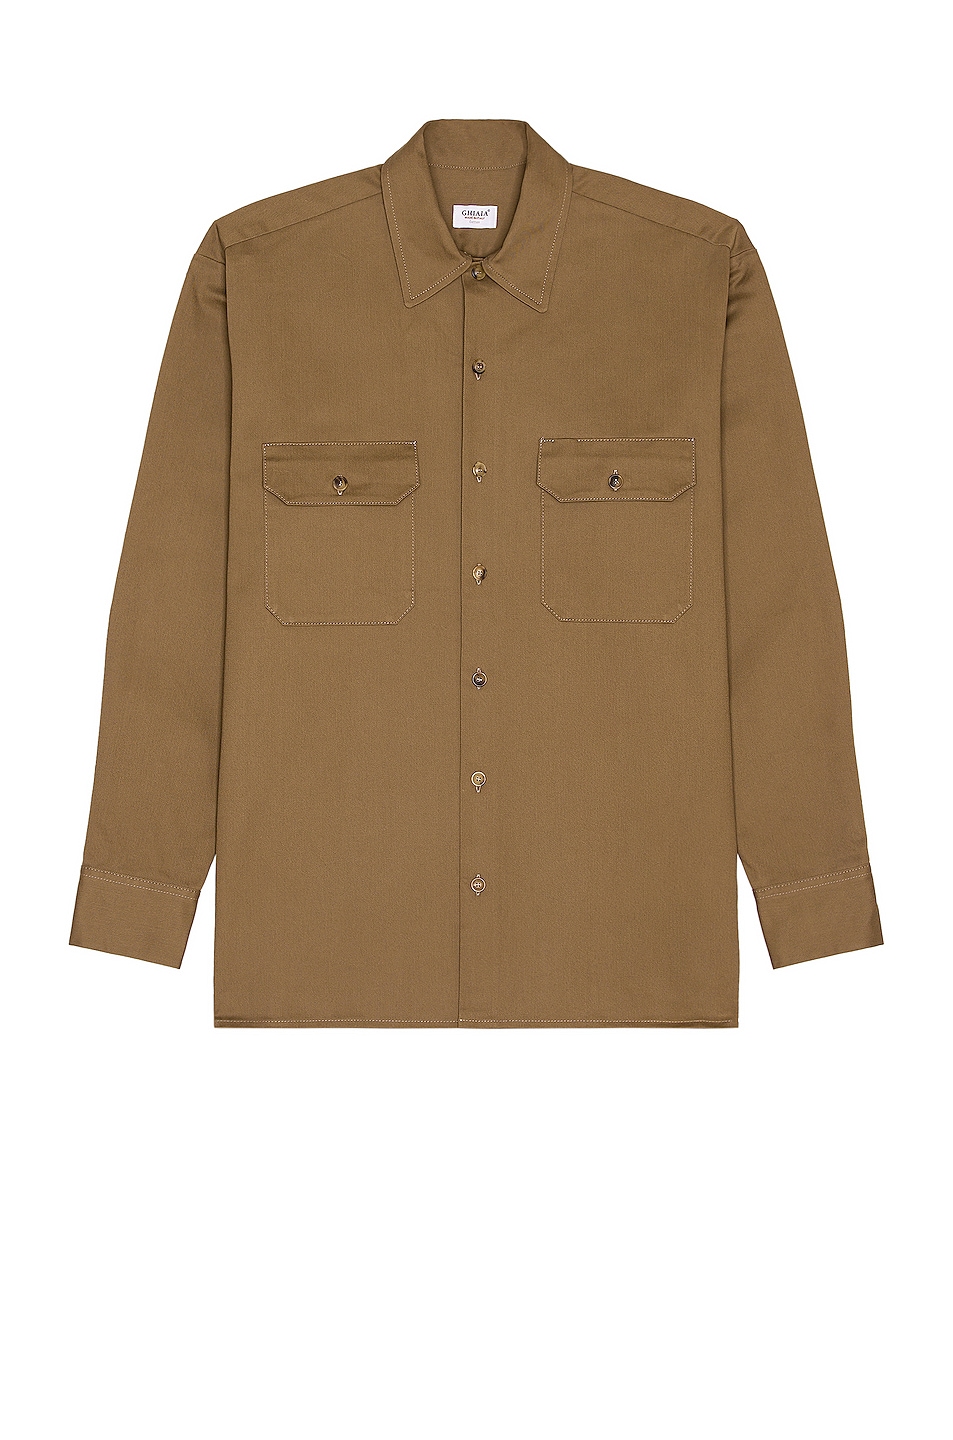 Image 1 of Ghiaia Cashmere Cotton Working Shirt in Cacao